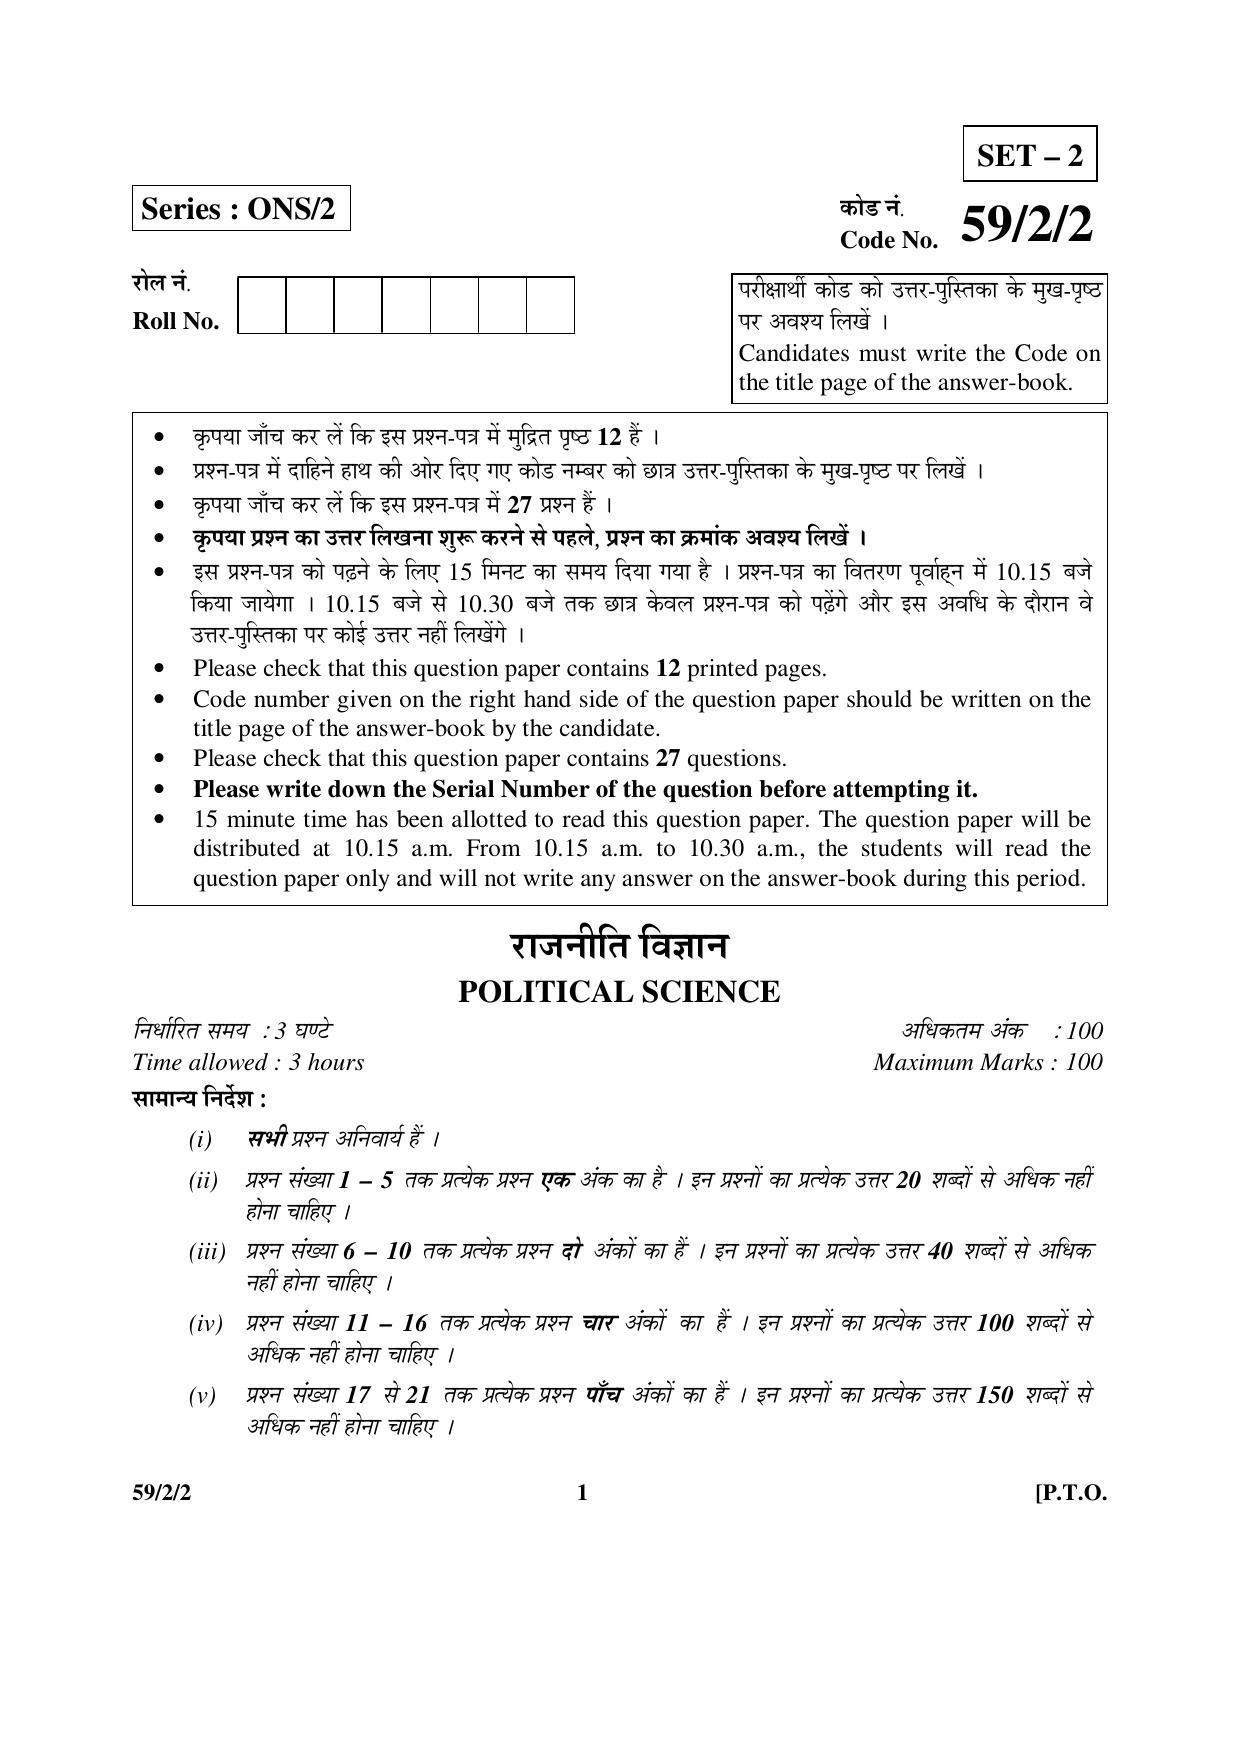 CBSE Class 12 59-2-2 _Political Science 2016 Question Paper - Page 1